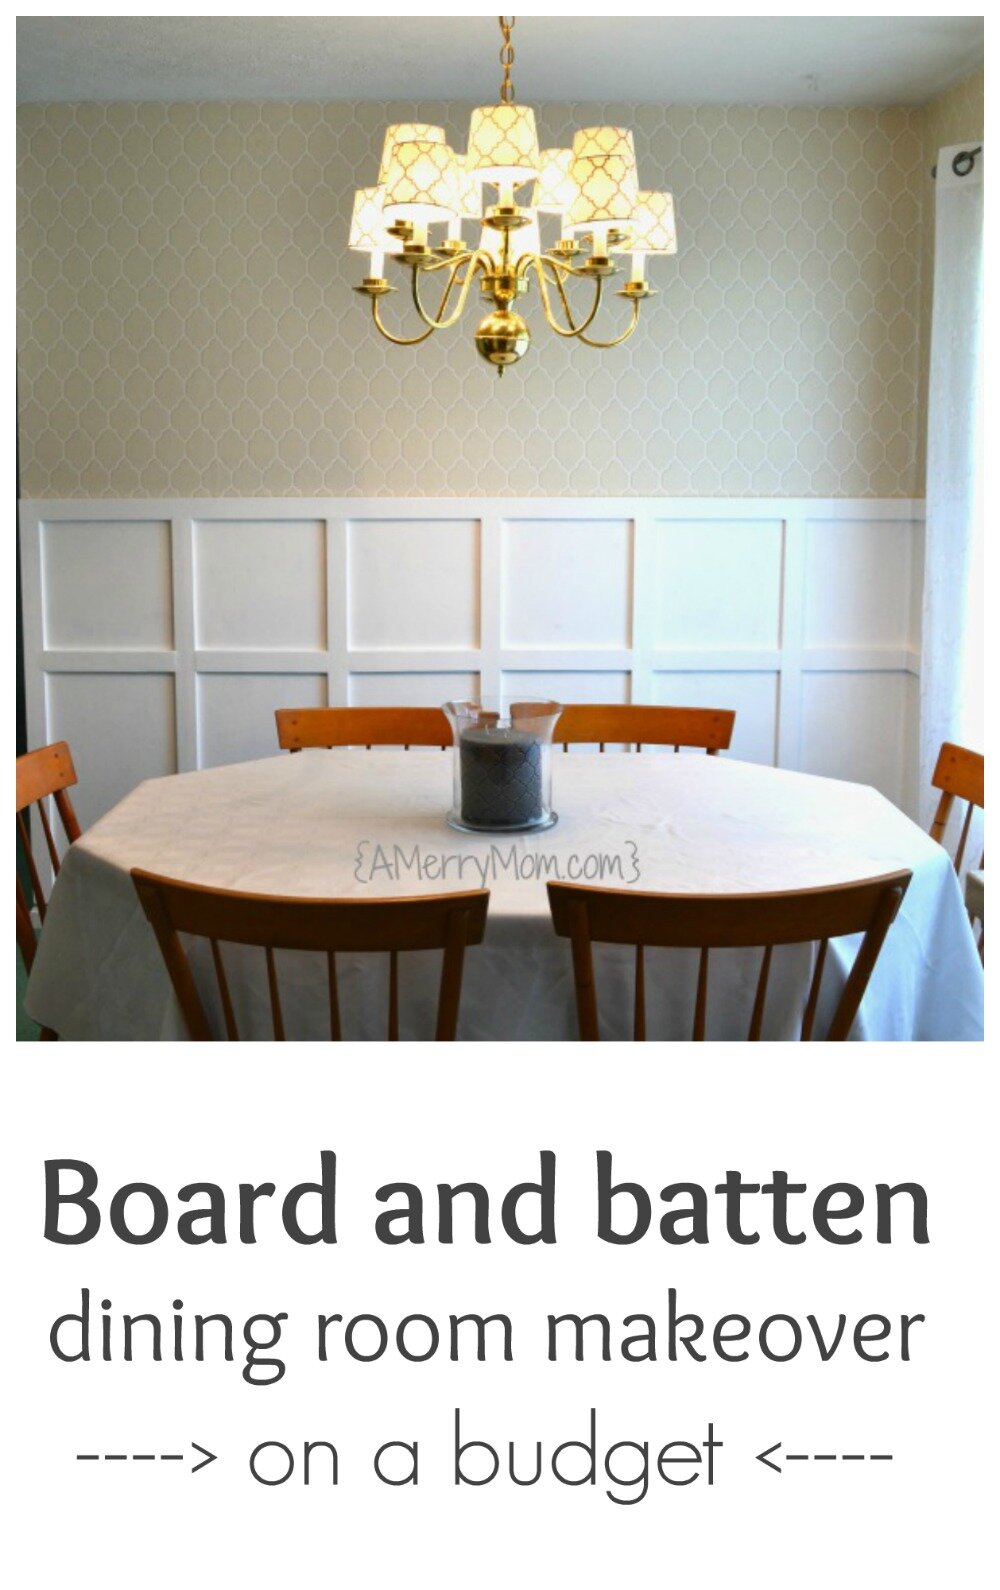 board and batten dining room makeover on a budget